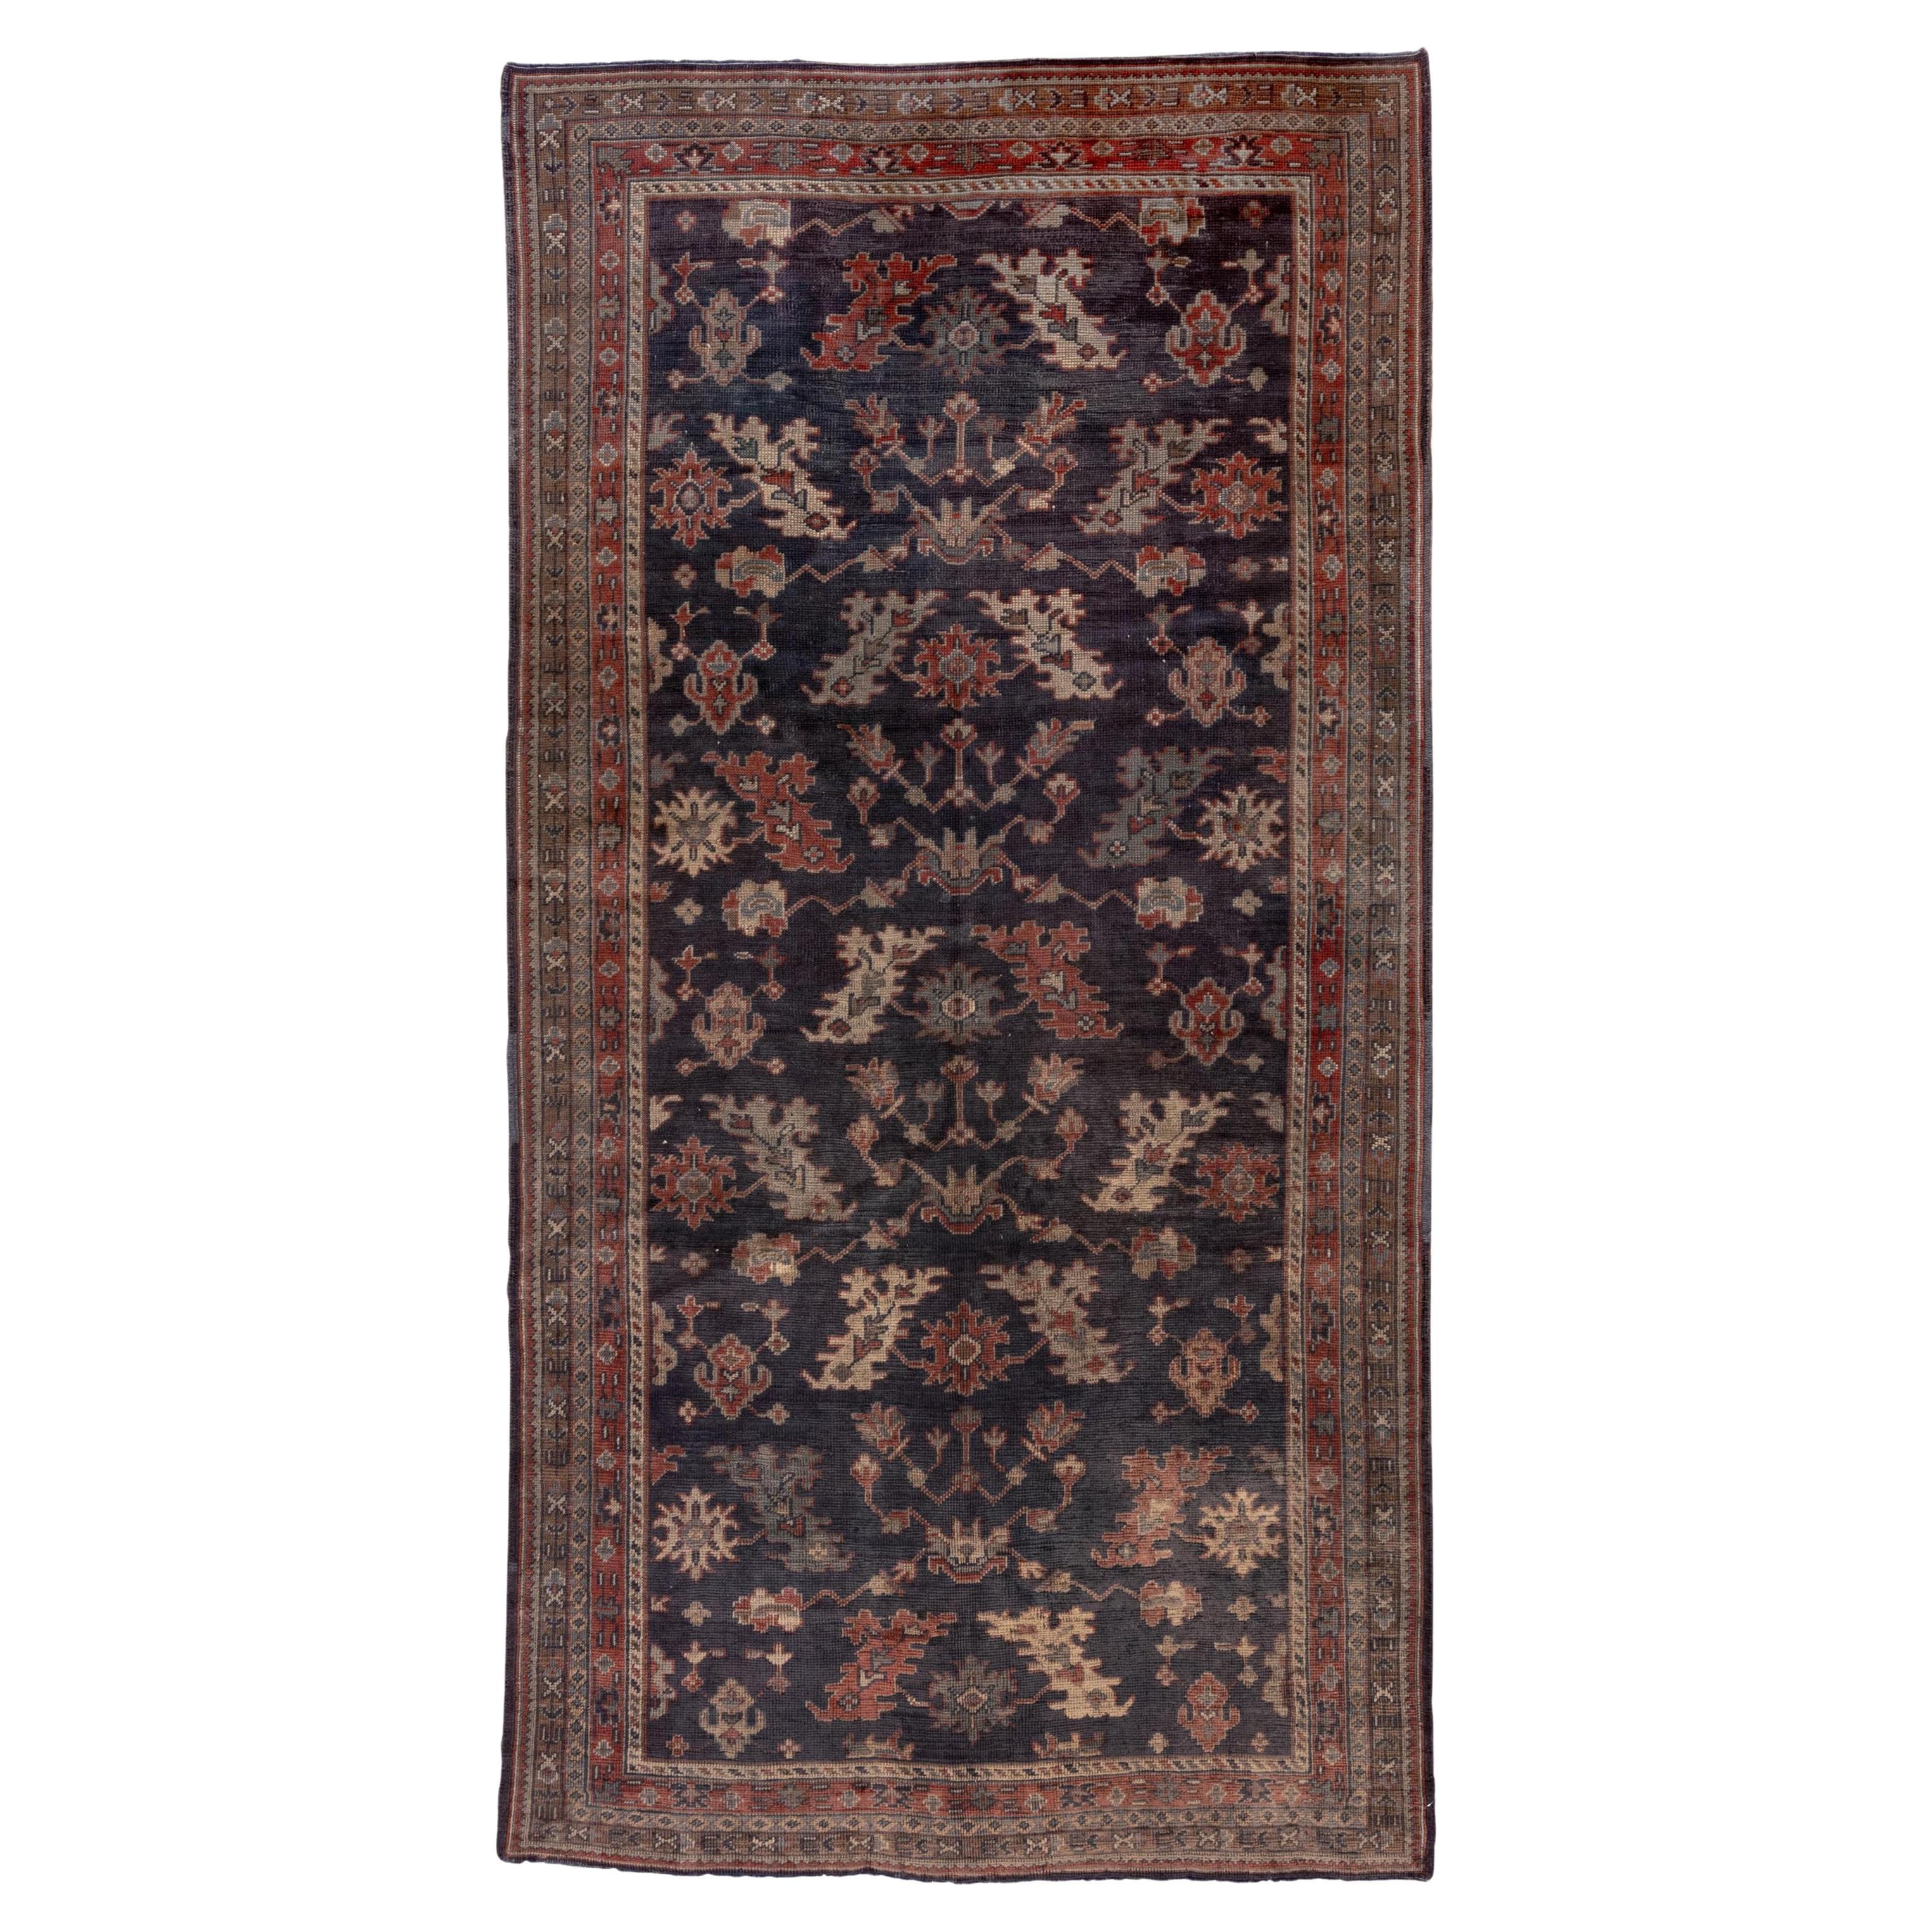 1920s Antique Turkish Oushak Gallery Rug, Navy Allover Field, Coral Borders For Sale